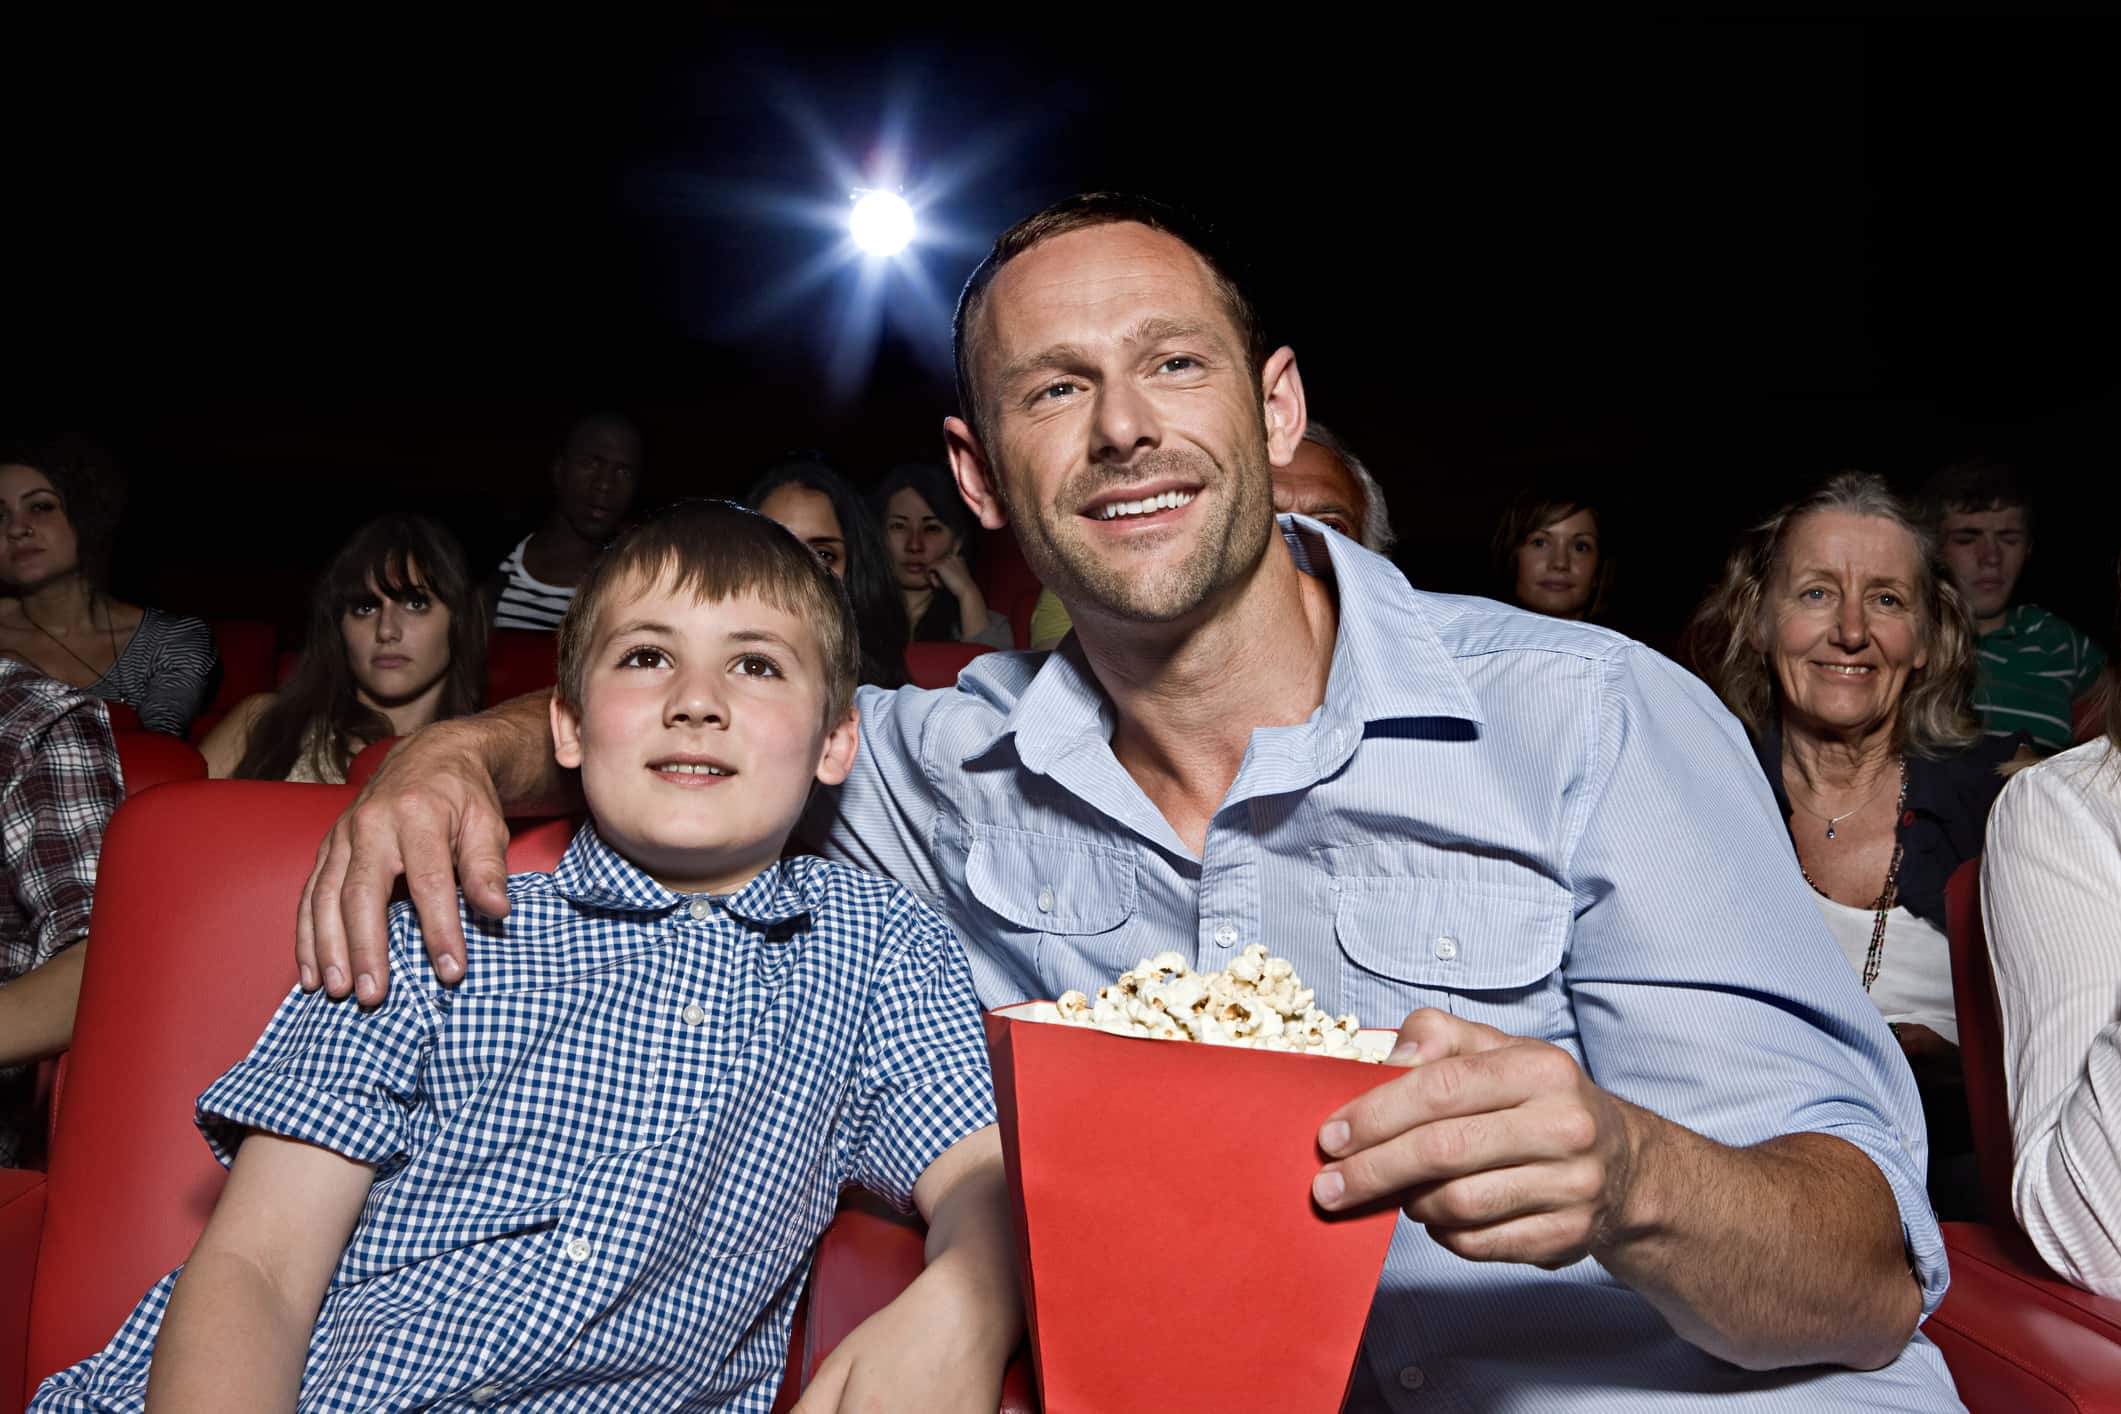 Father and son enjoying a movie.